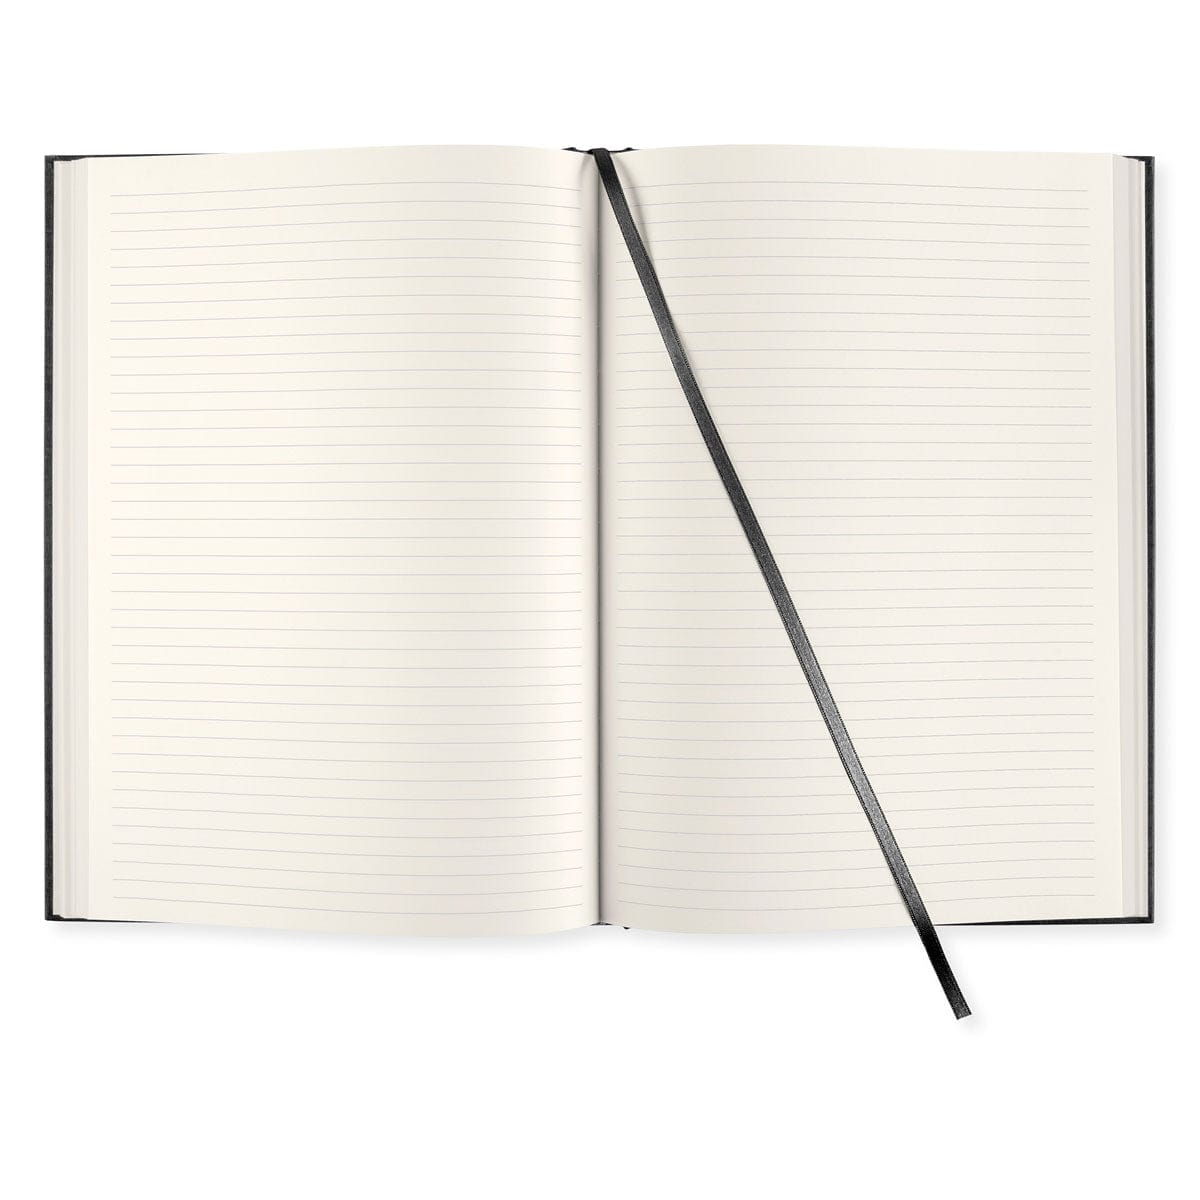 PaperStyle Paperstyle NOTEBOOK A5 256p. Ruled Rough Linen